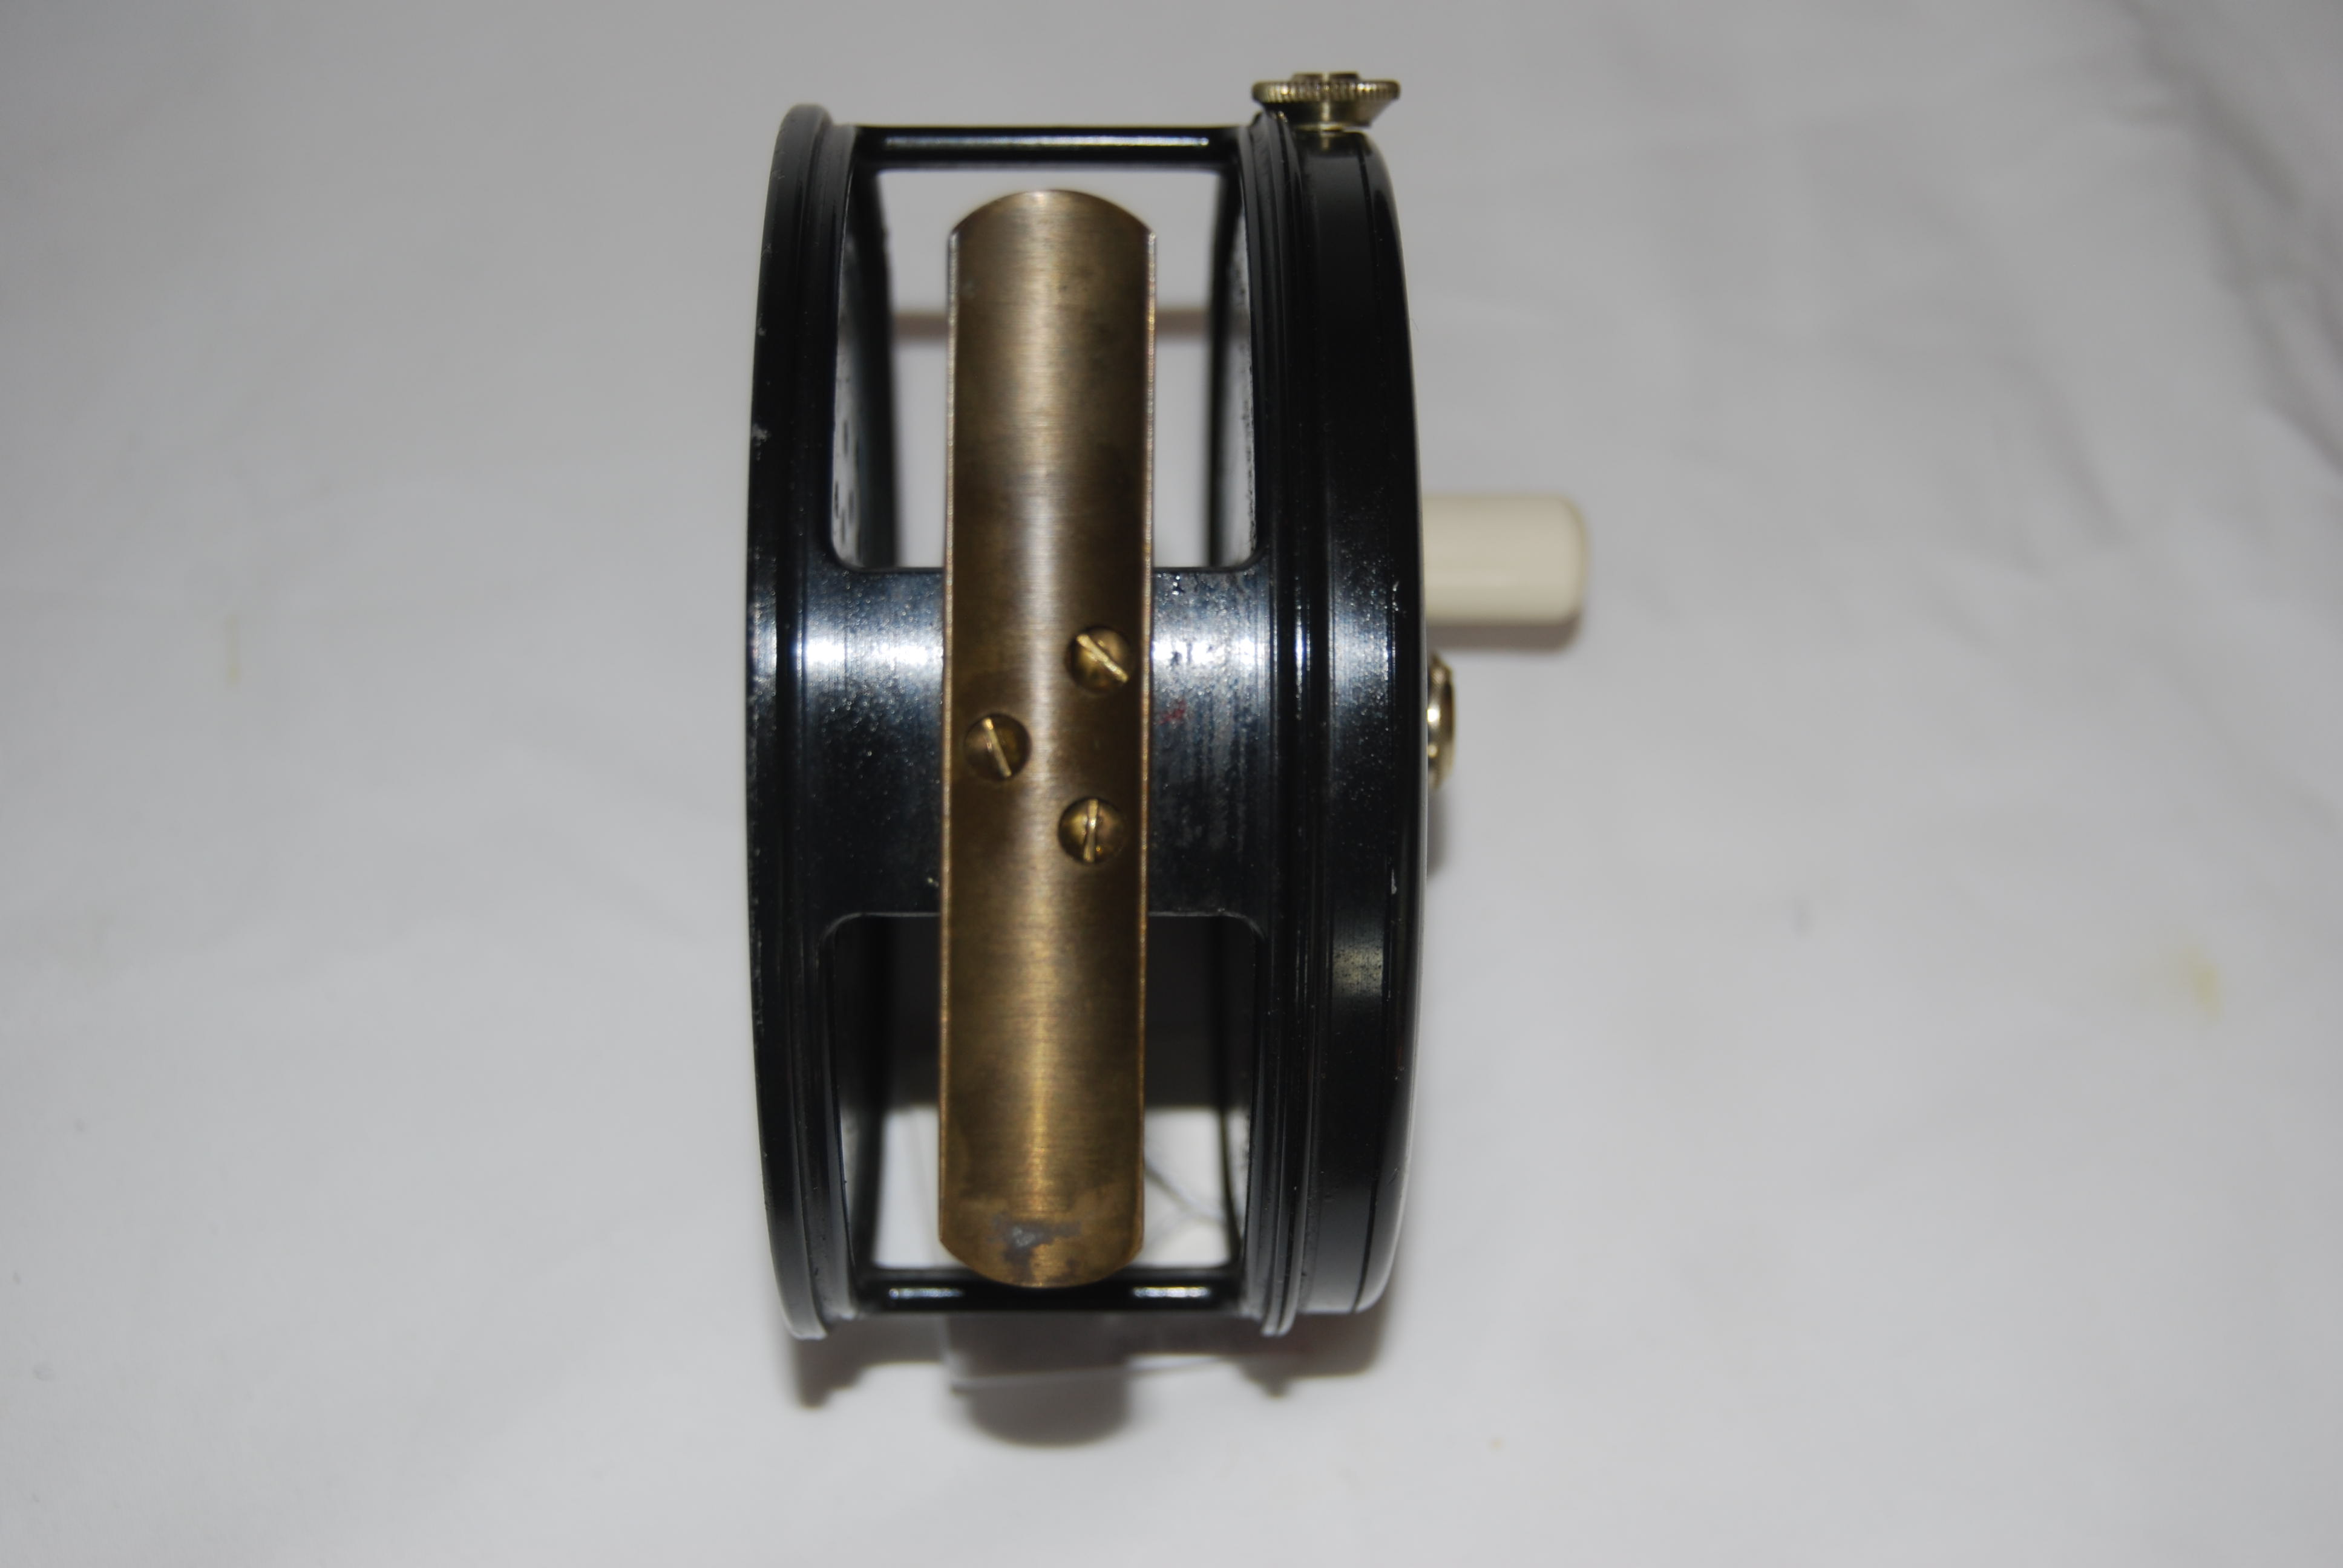 4 1/4” ALLCOCKS [JW YOUNG] “PERFECT-TYPE” SALMON REEL. No Line Guard. RHW.  Long smooth brass foot fastened with 3 screws [3 1/4]; Adjustable Dual  Check Mechanism; Ball-bearing Race; White Xylonite Knob; Totally